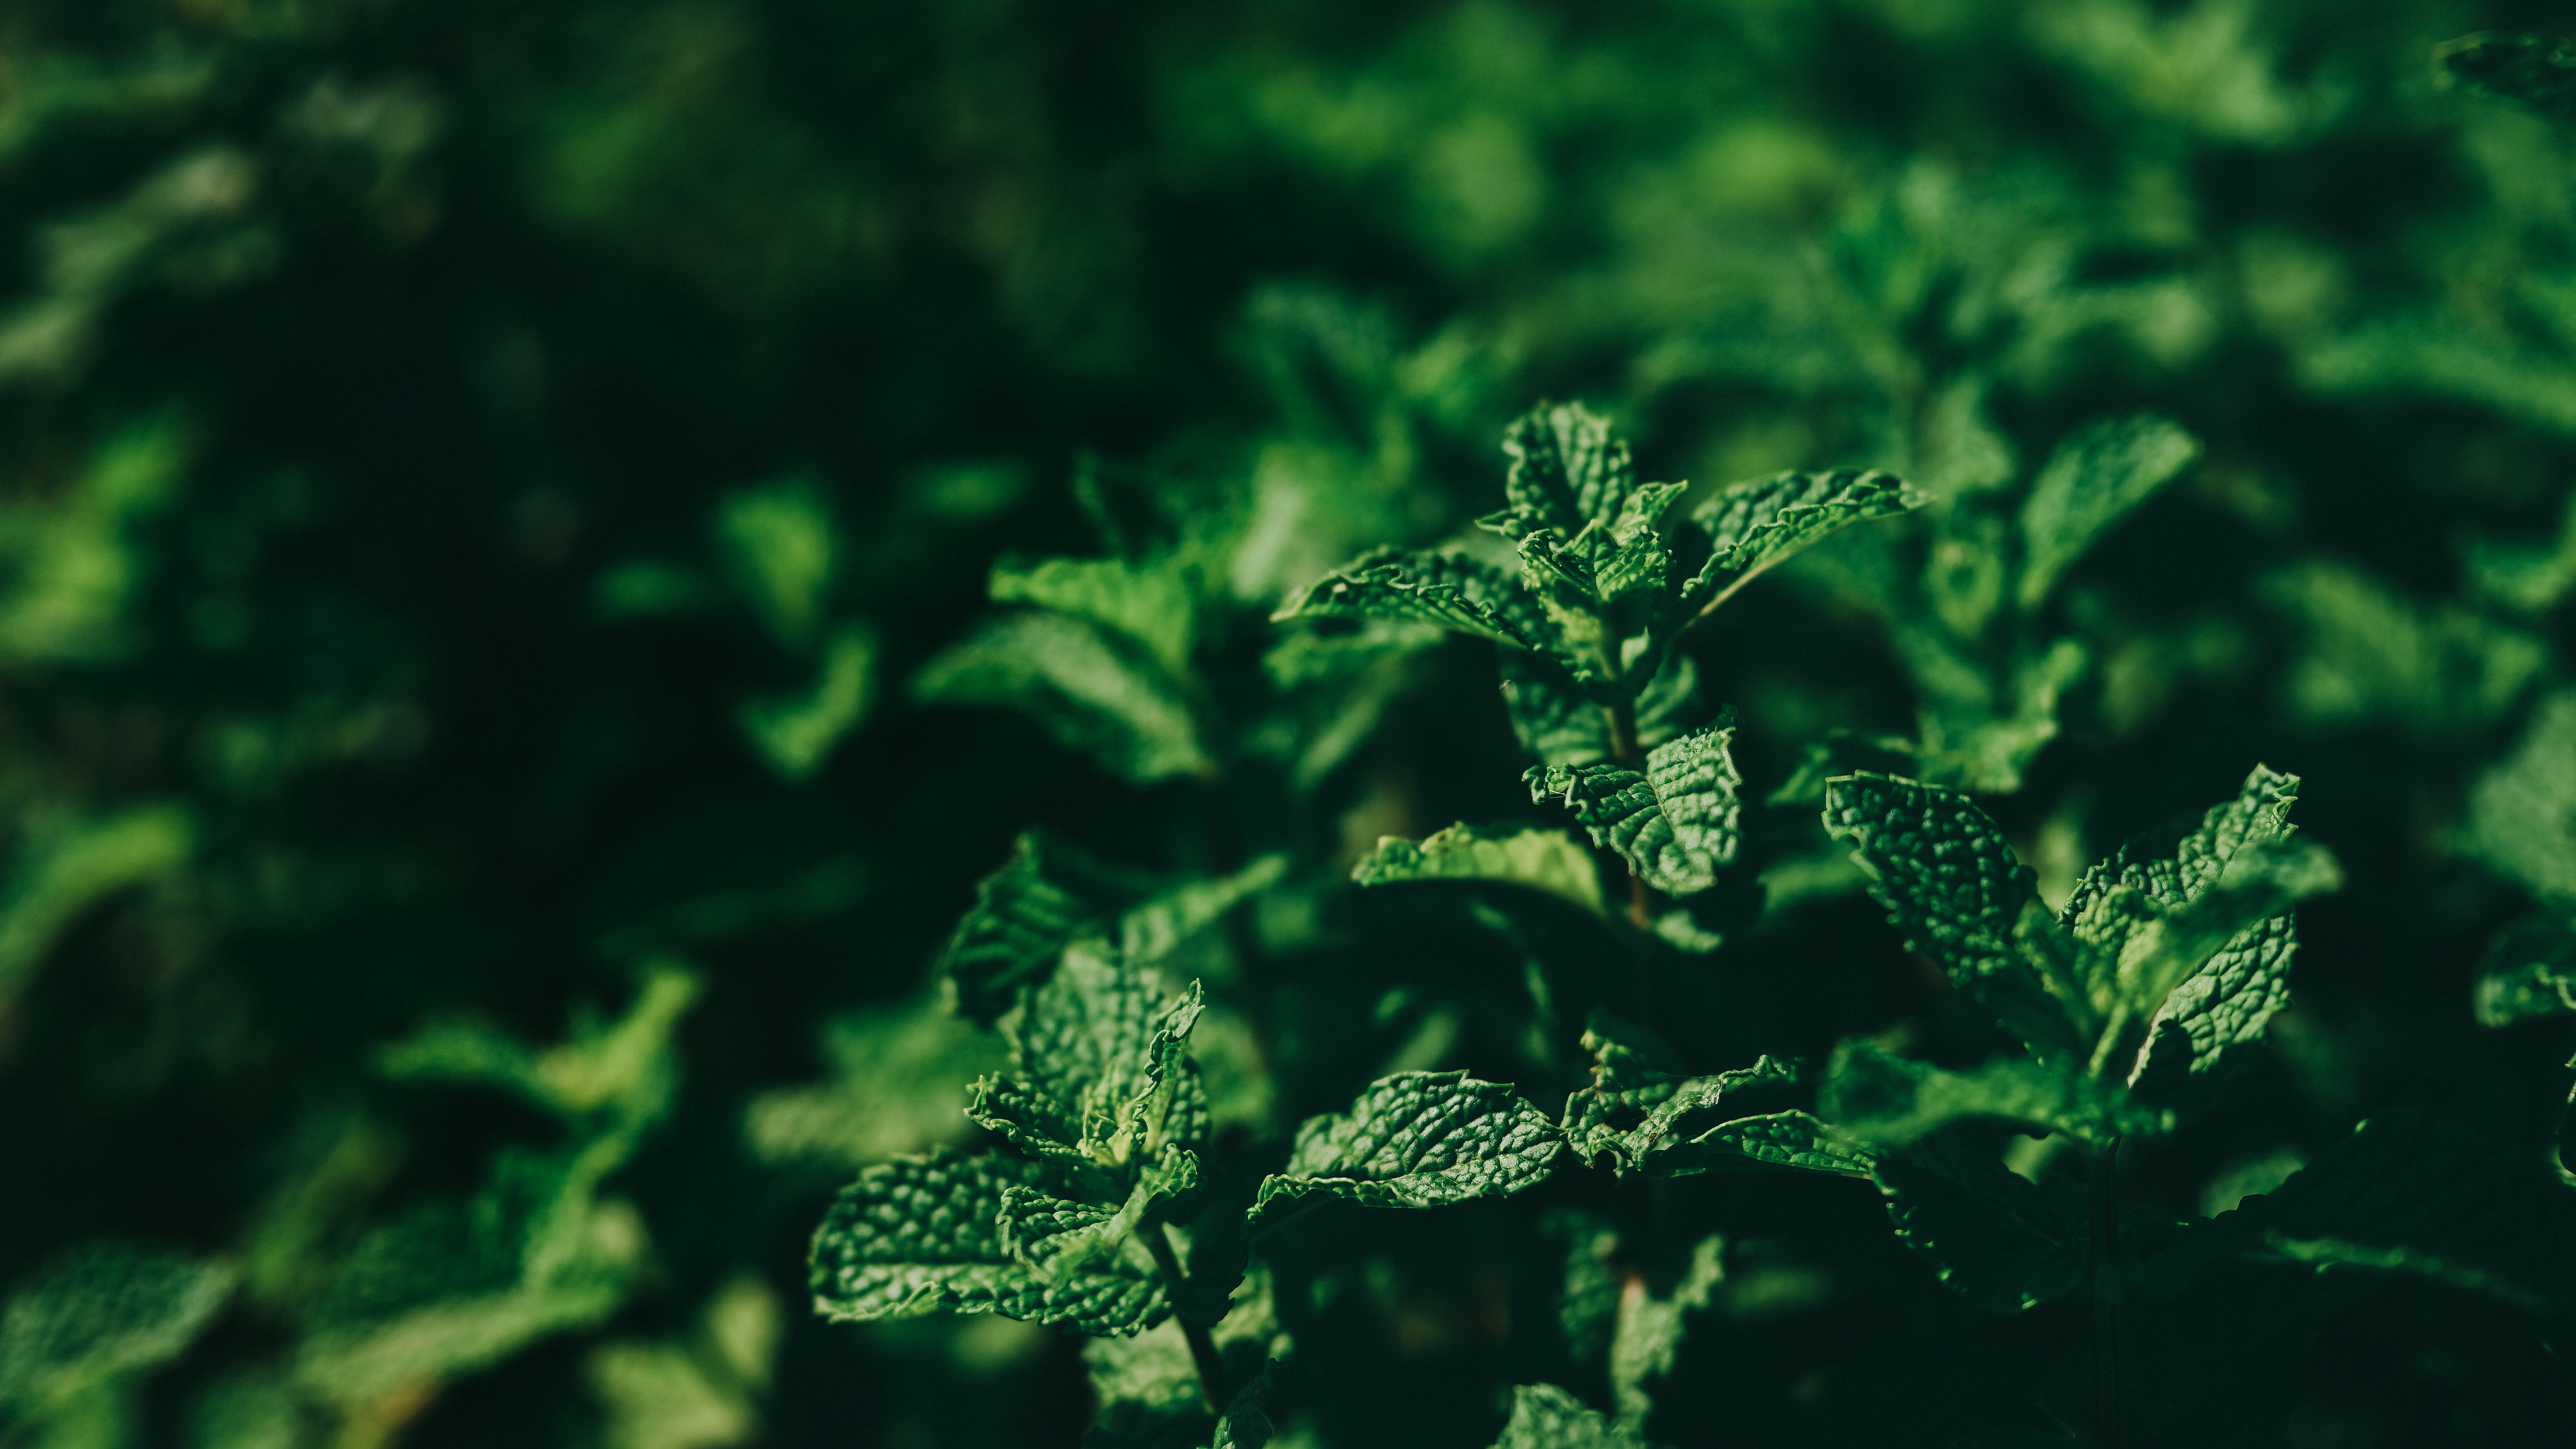 General 6016x3384 nature leaves plants mint leaves photography outdoors summer 50mm Jonathan Curry